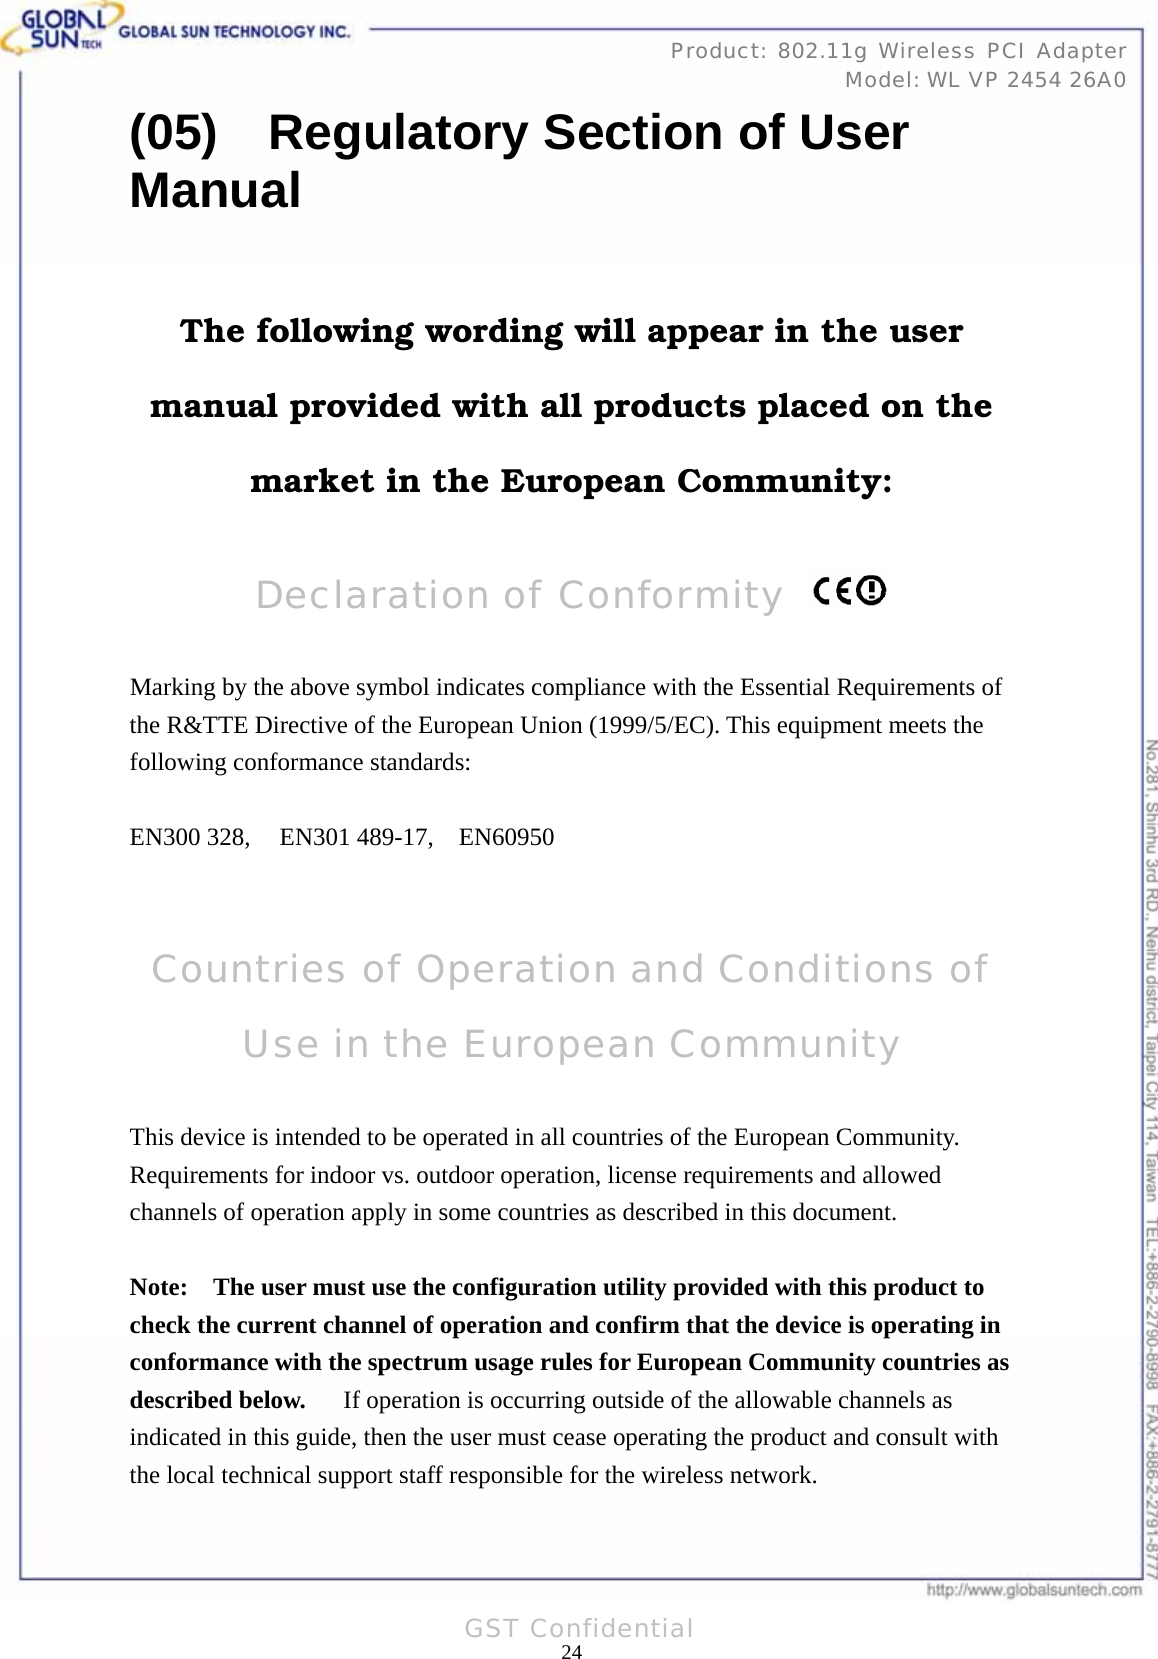   24Product: 802.11g Wireless PCI Adapter Model: WL VP 2454 26A0GST Confidential (05)    Regulatory Section of User Manual  The following wording will appear in the user manual provided with all products placed on the market in the European Community:  Declaration of Conformity    Marking by the above symbol indicates compliance with the Essential Requirements of the R&amp;TTE Directive of the European Union (1999/5/EC). This equipment meets the following conformance standards:  EN300 328,   EN301 489-17,  EN60950   Countries of Operation and Conditions of Use in the European Community  This device is intended to be operated in all countries of the European Community.   Requirements for indoor vs. outdoor operation, license requirements and allowed channels of operation apply in some countries as described in this document.  Note:   The user must use the configuration utility provided with this product to check the current channel of operation and confirm that the device is operating in conformance with the spectrum usage rules for European Community countries as described below.   If operation is occurring outside of the allowable channels as indicated in this guide, then the user must cease operating the product and consult with the local technical support staff responsible for the wireless network.  